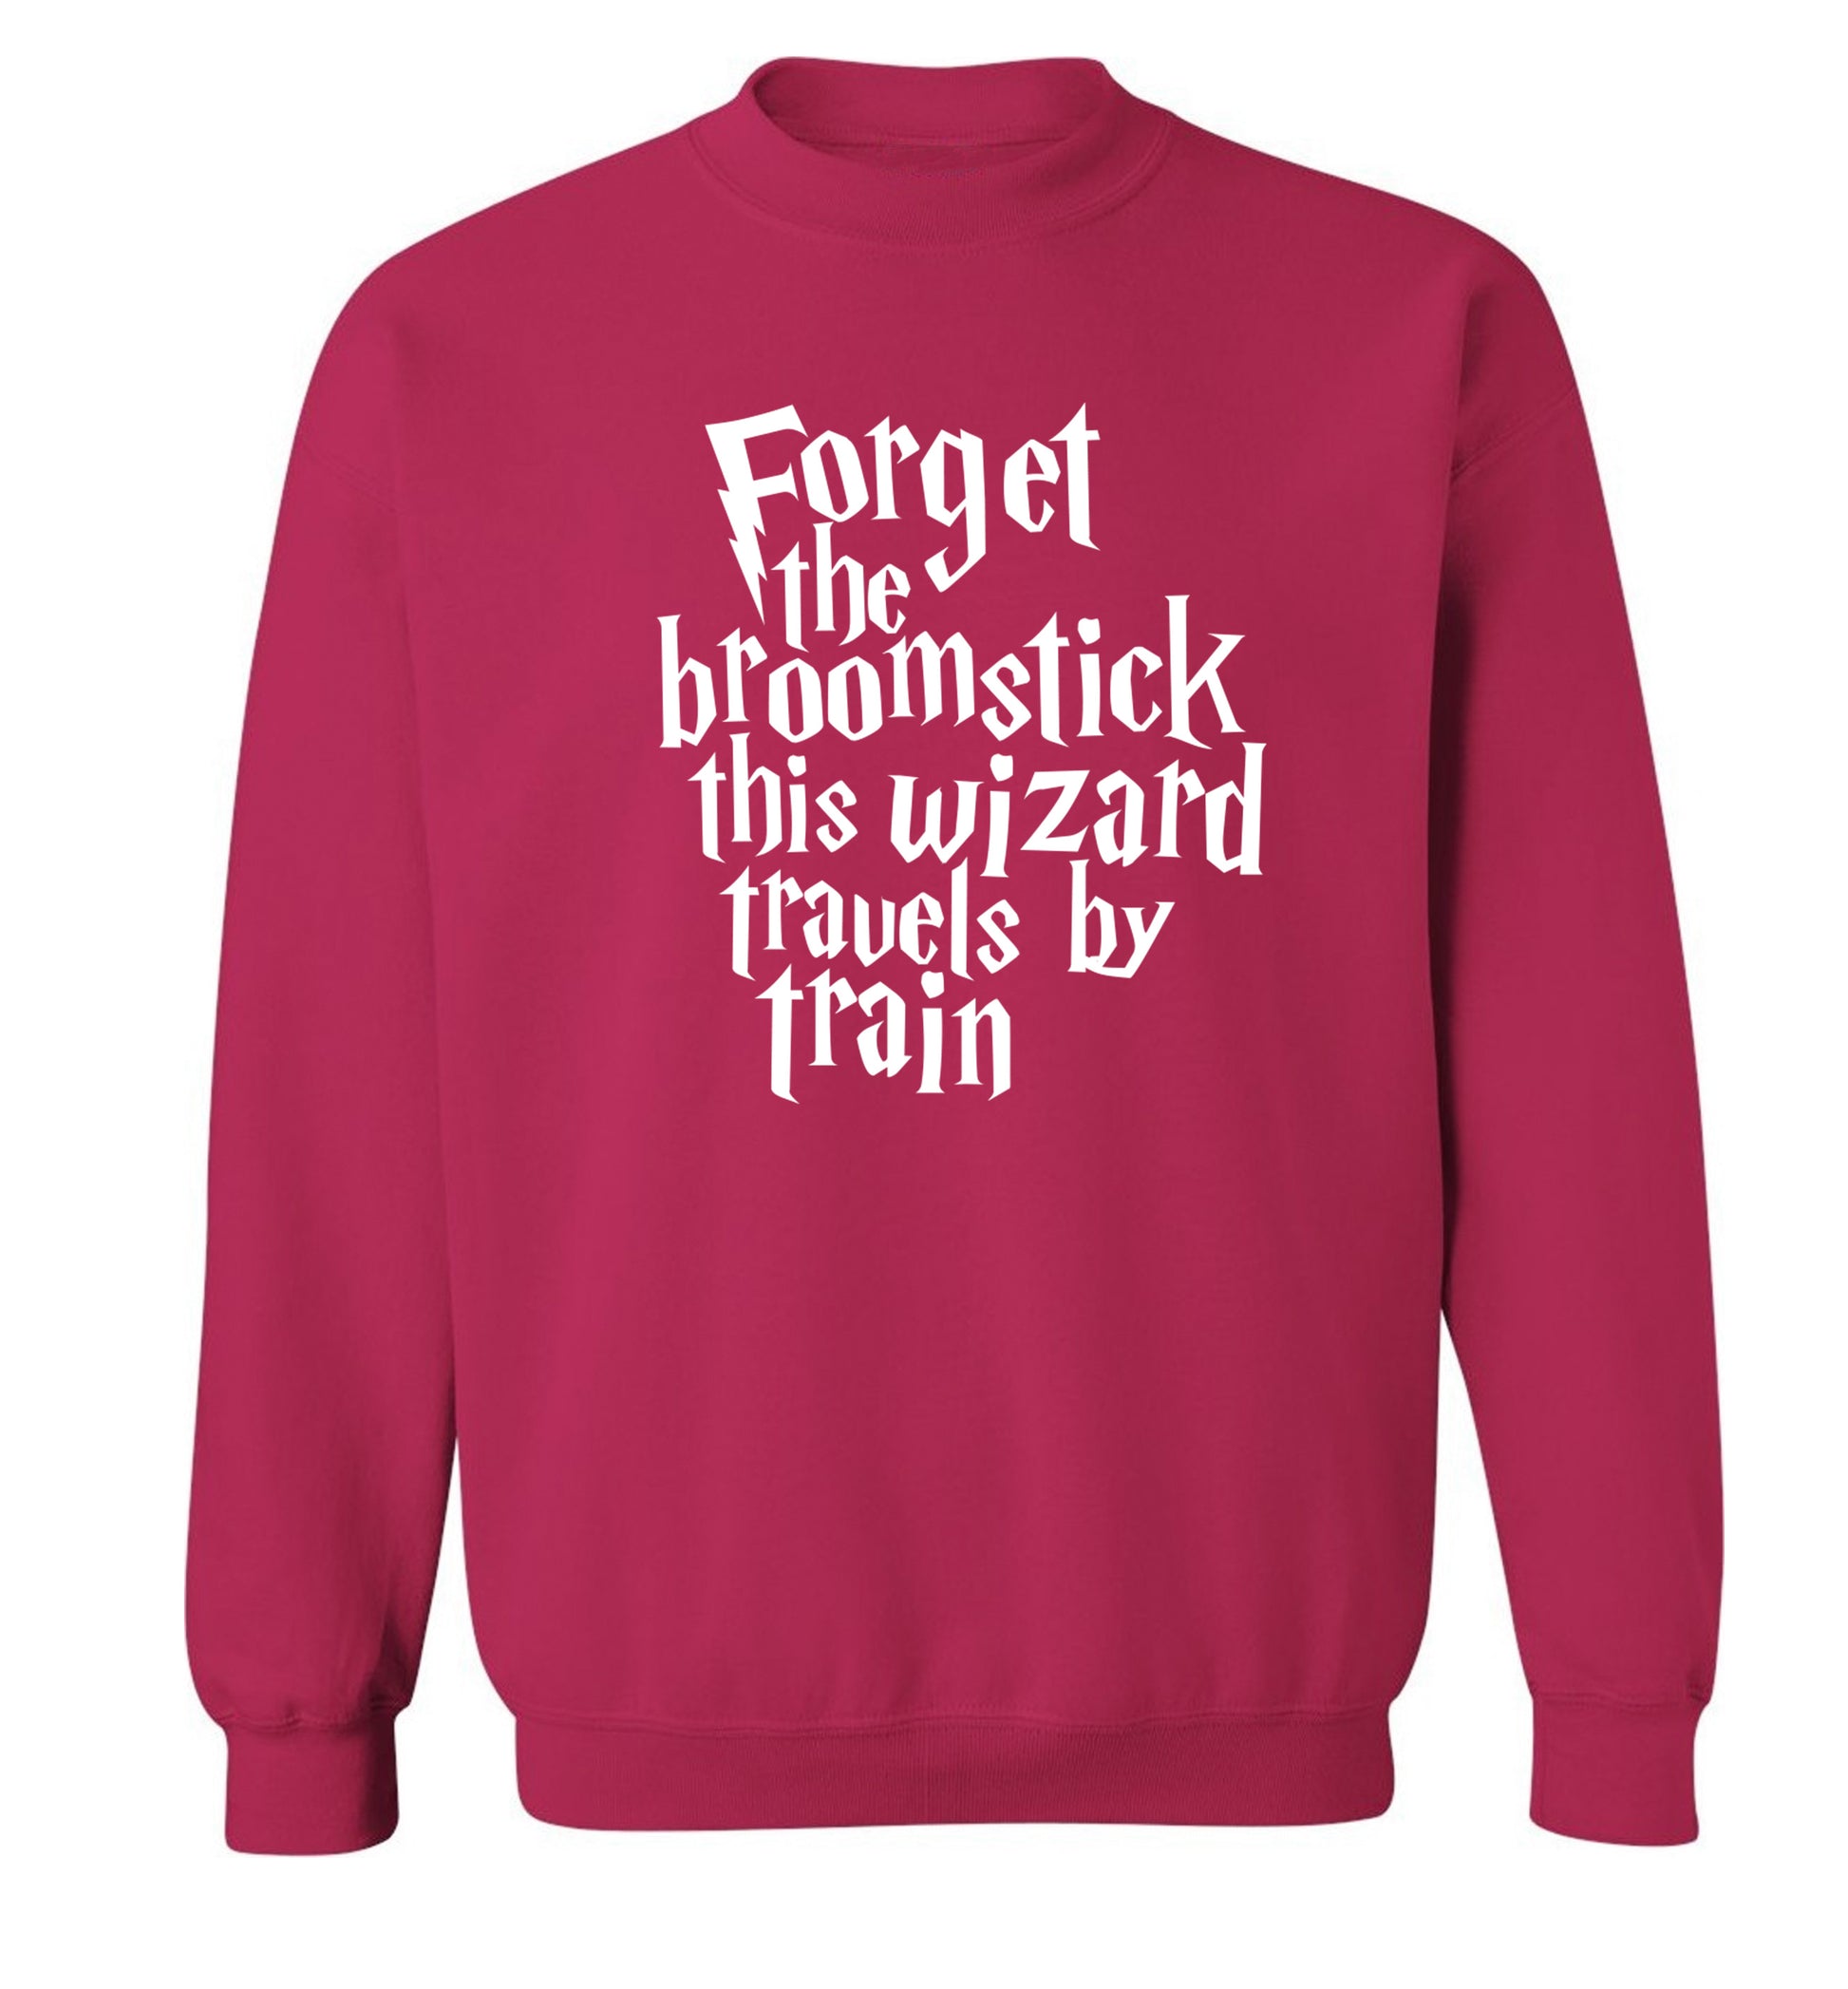 Forget the broomstick this wizard travels by train Adult's unisexpink Sweater 2XL